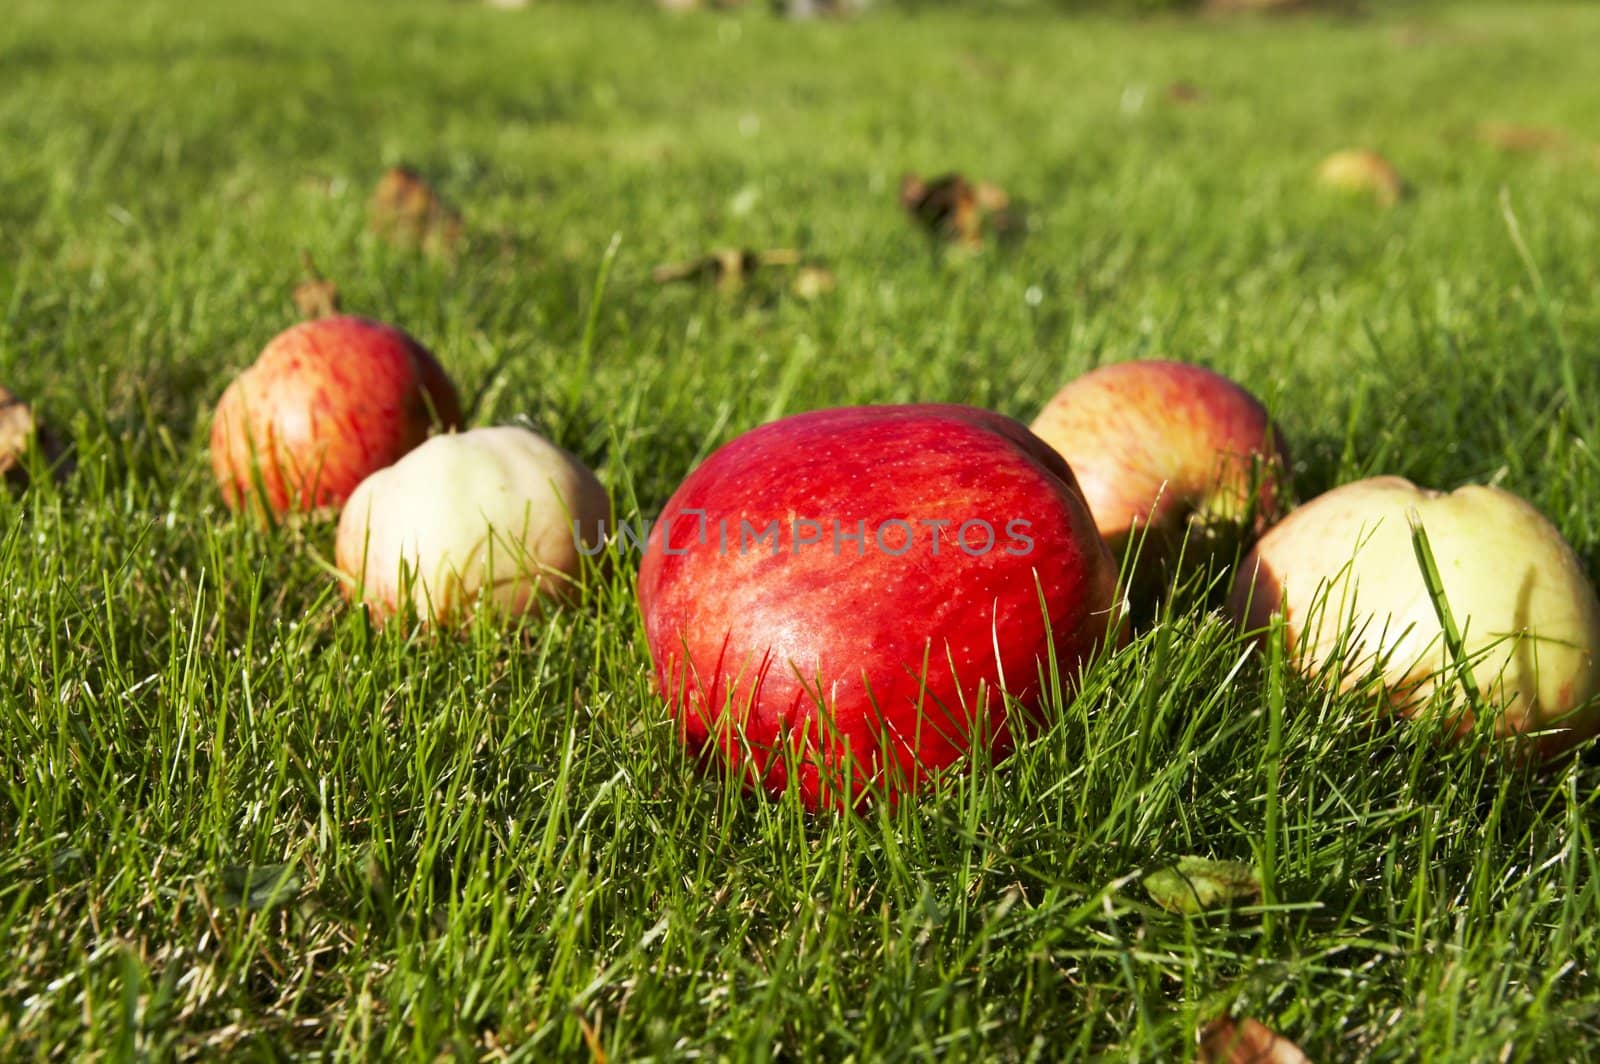 Red interesting colored apple on grass